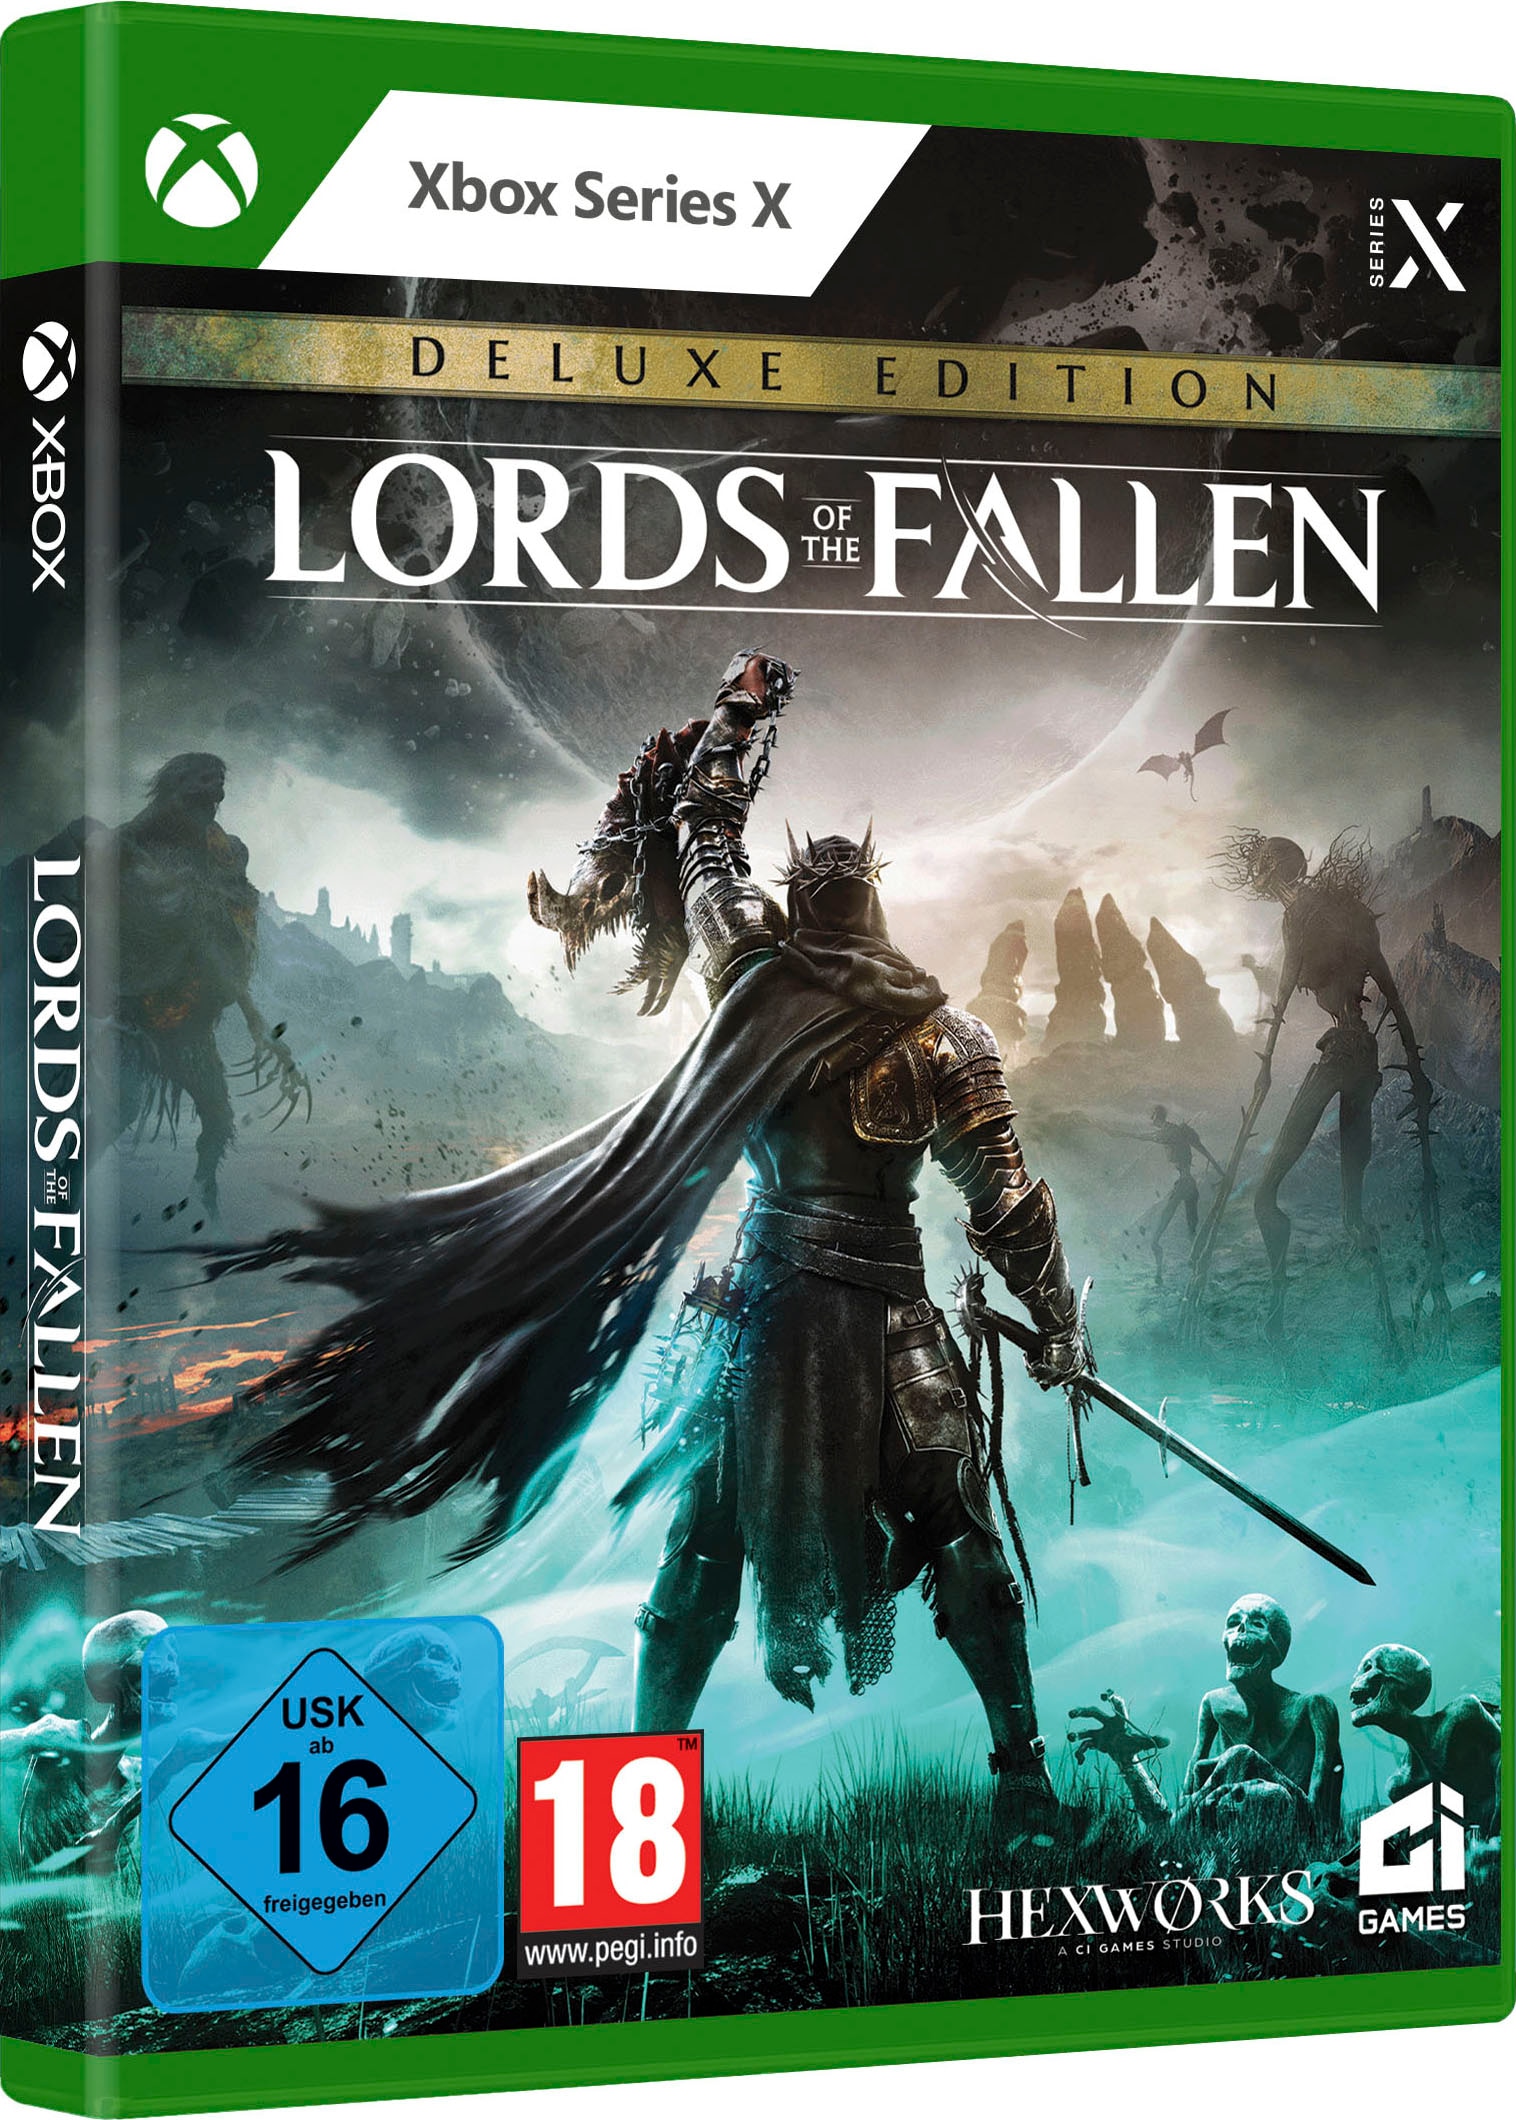 Spielesoftware »Lords of the Fallen Deluxe Edition«, Xbox Series X